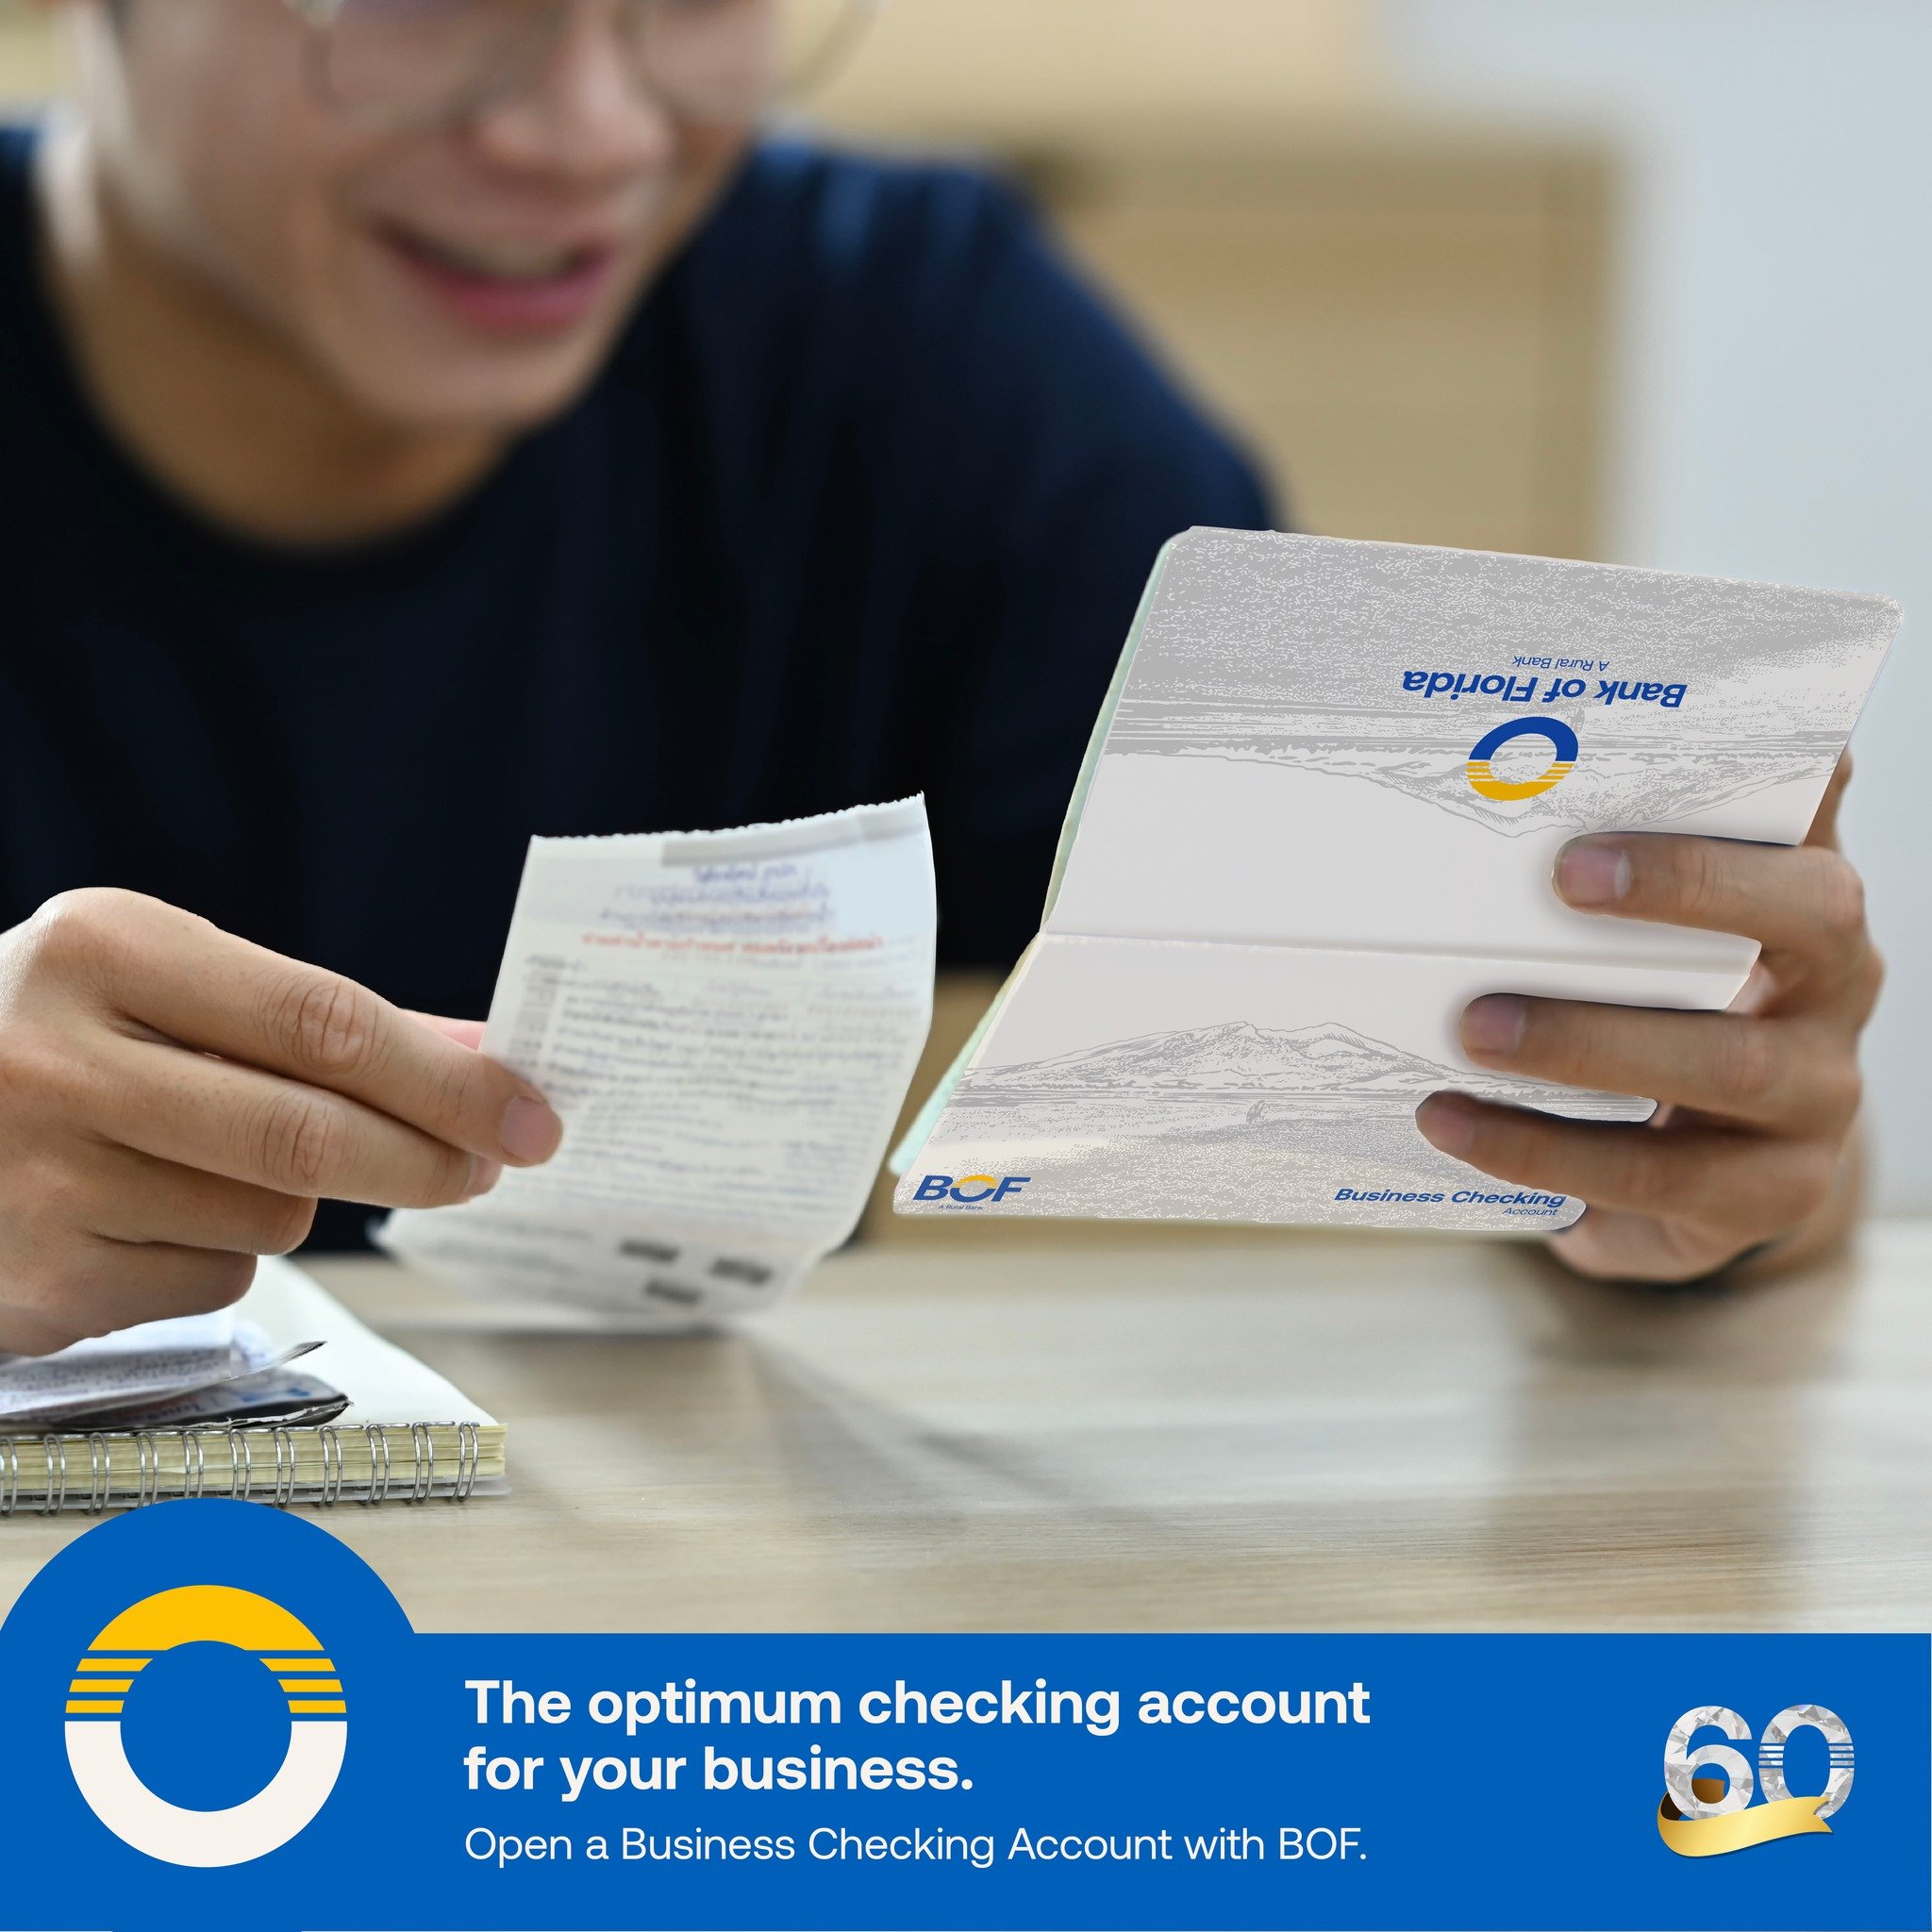 The perfect fit for your business needs. Introducing the Business Checking Account with BOF. Explore seamless banking solutions tailored to your company's requirements.

Visit our website for the  features and requirements.
https://www.bof.com.ph/pas